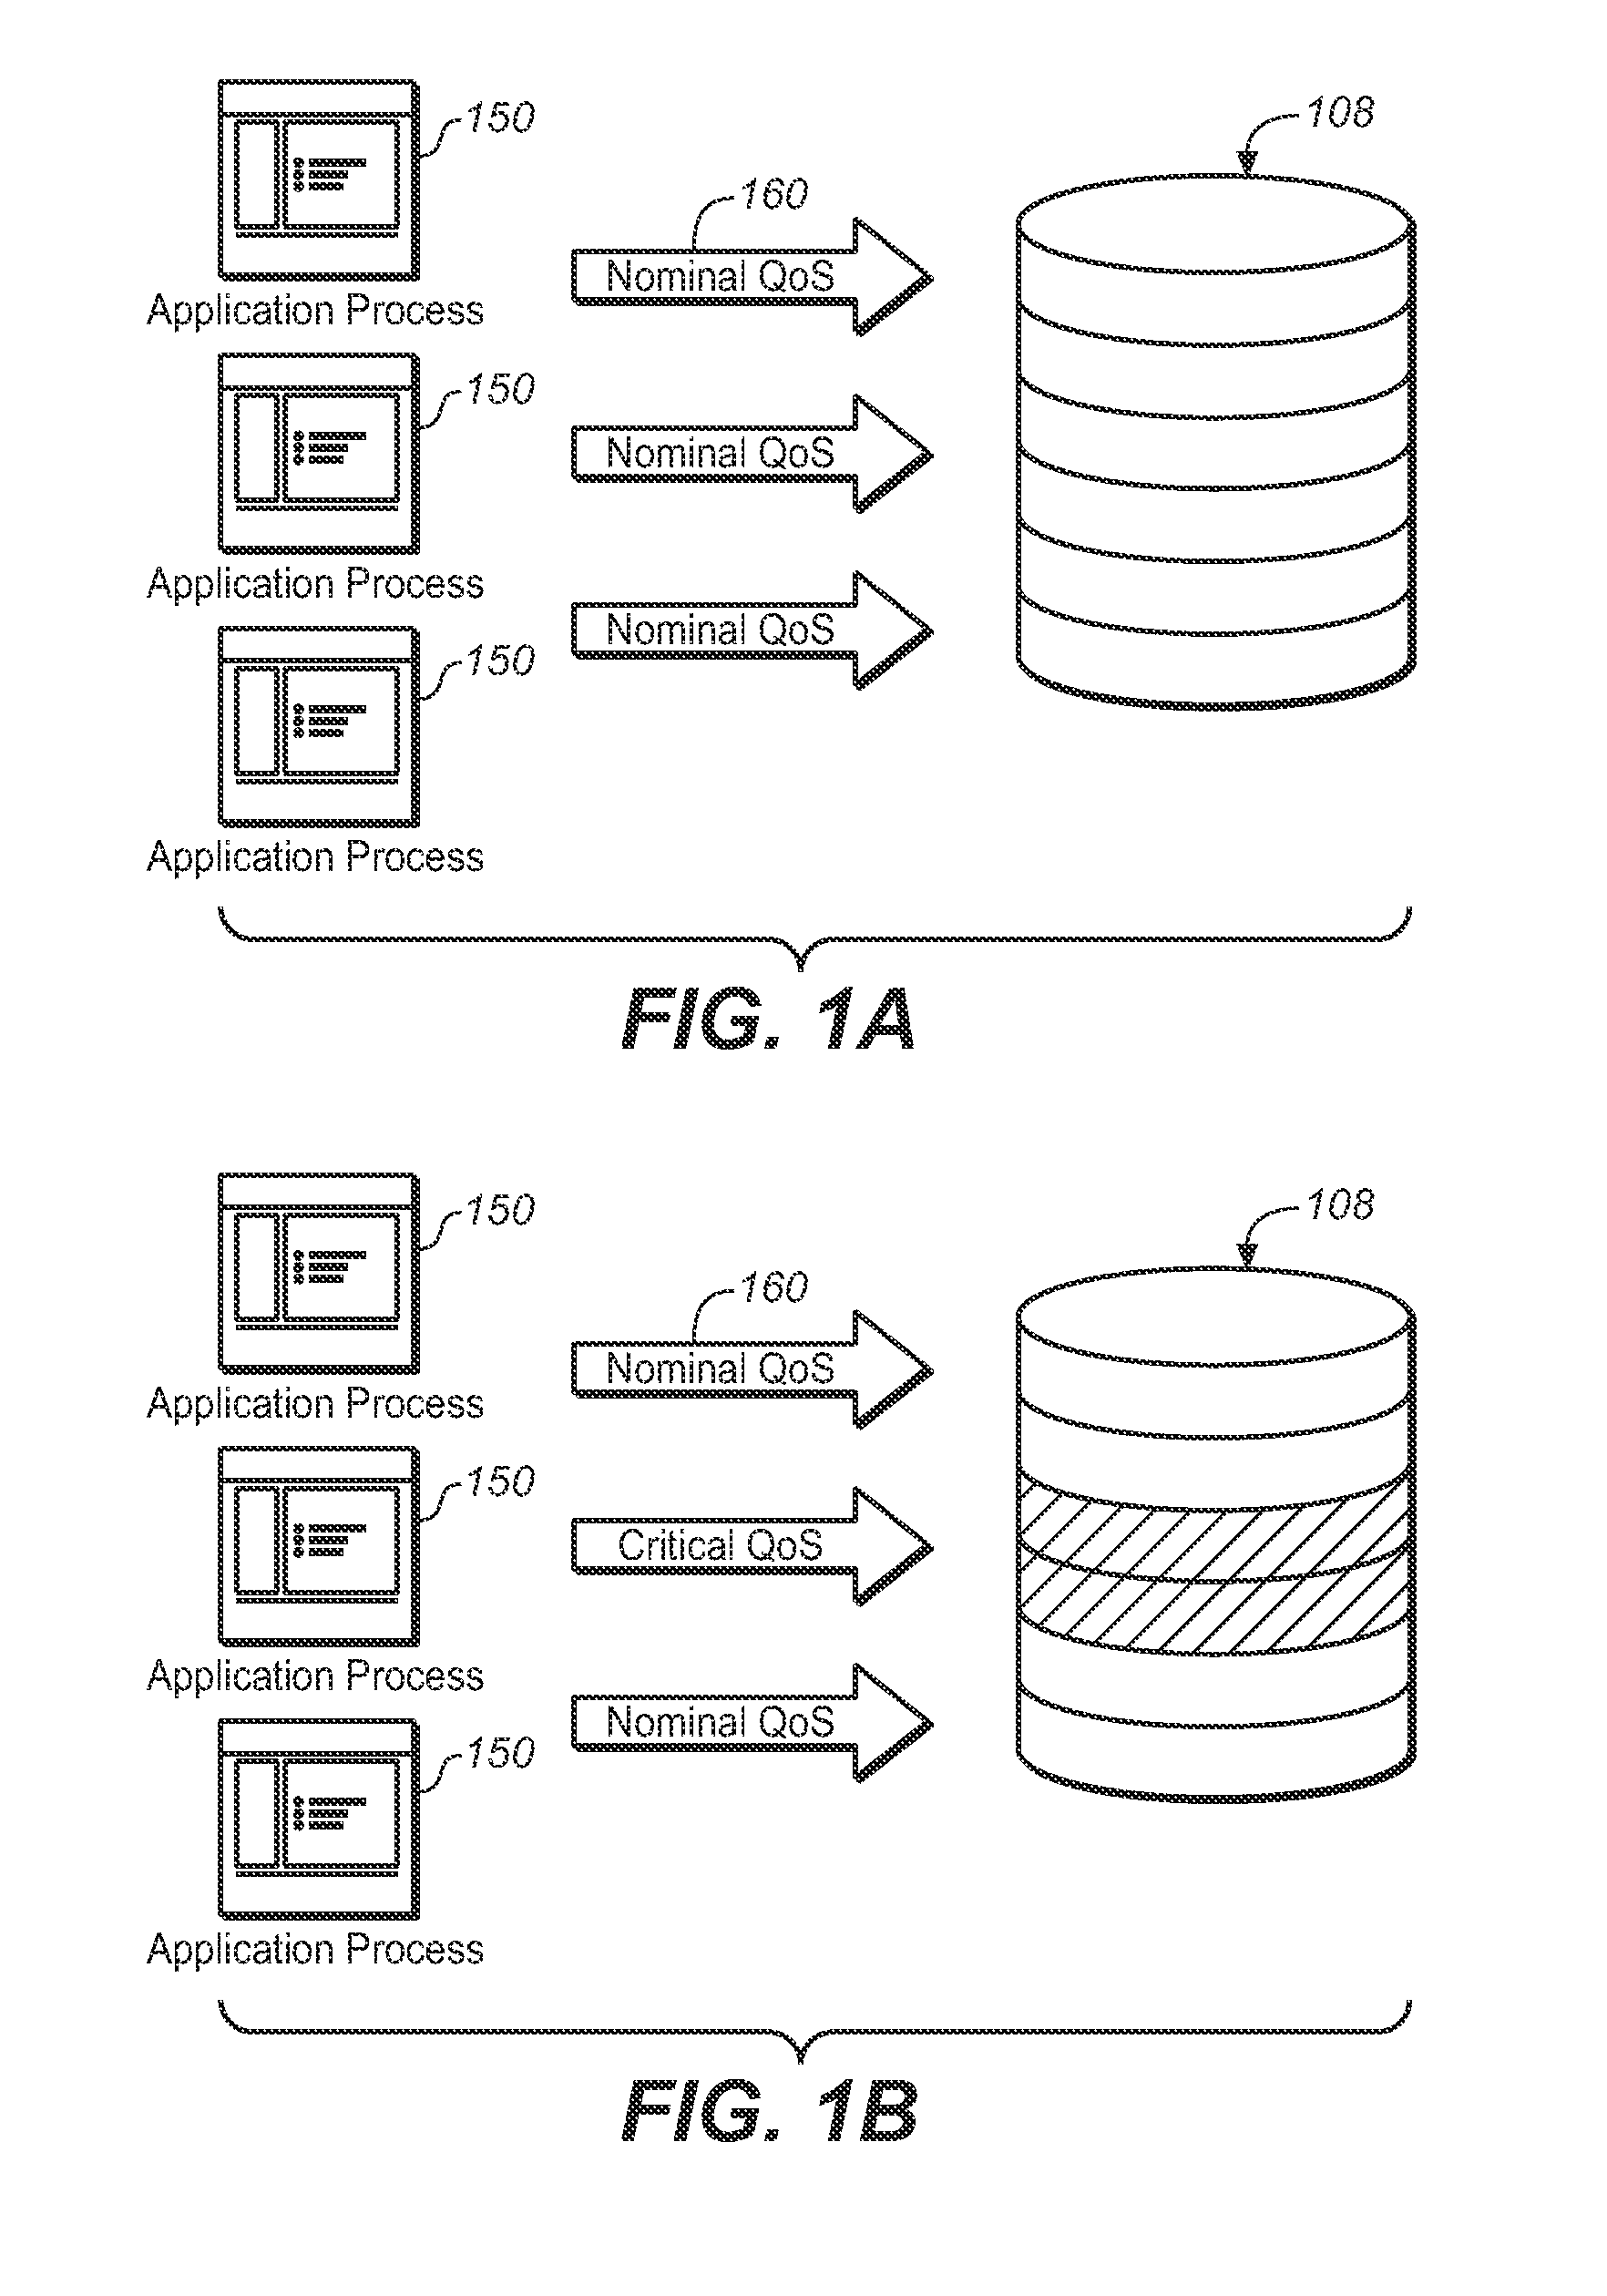 System and method for QoS-based storage tiering and migration technique